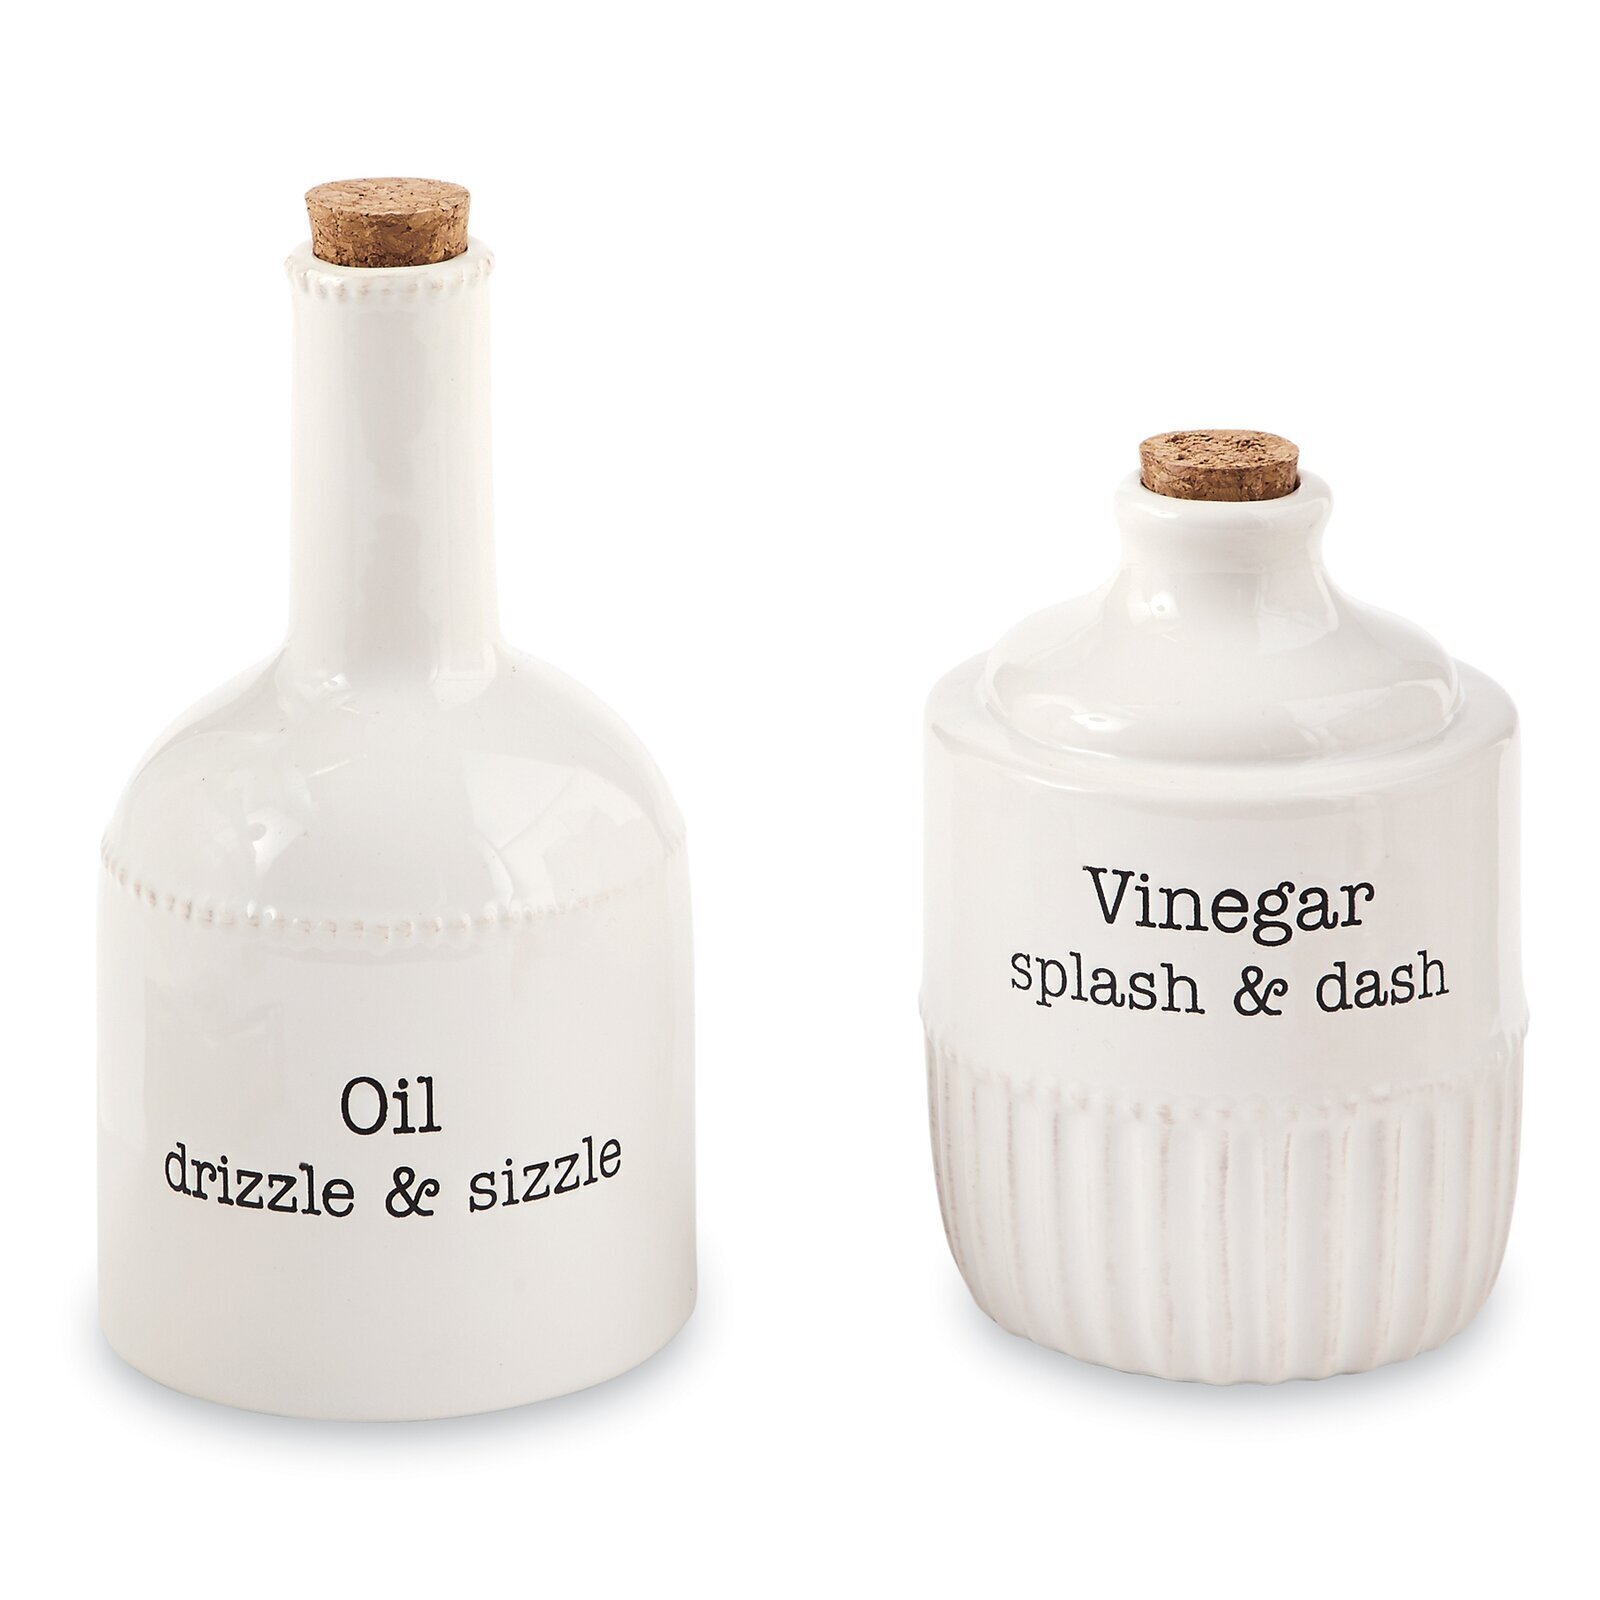 Quirky decorative olive oil bottles